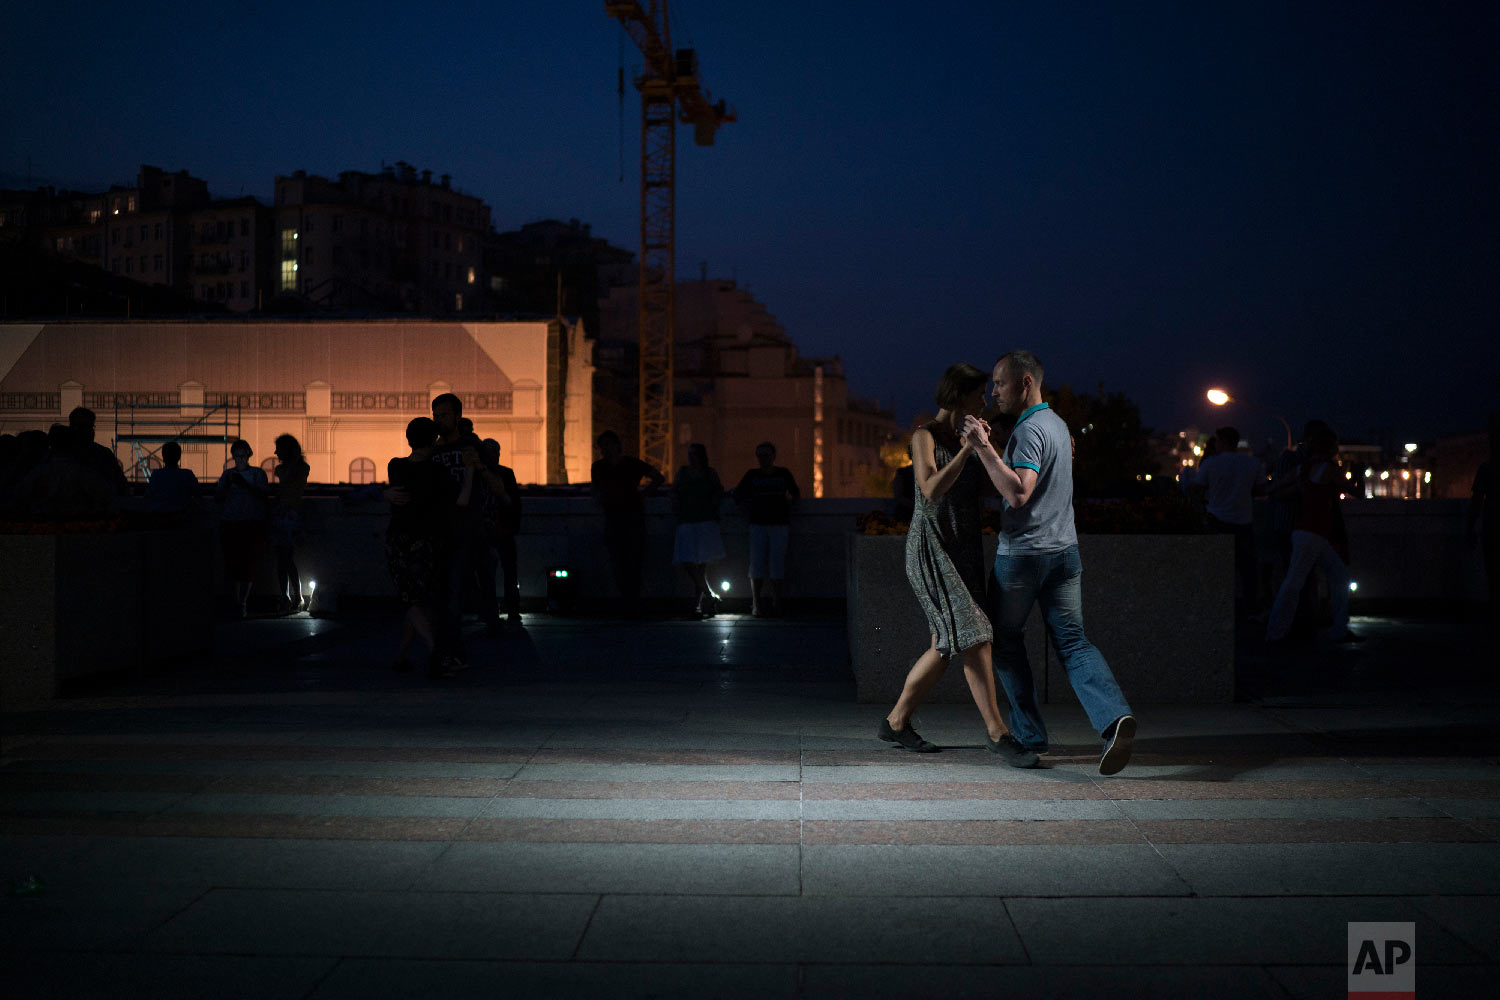  A couple dances tango on a bridge in central Moscow, during the 2018 soccer World Cup in Russia on June 22, 2018. (AP Photo/Felipe Dana) 